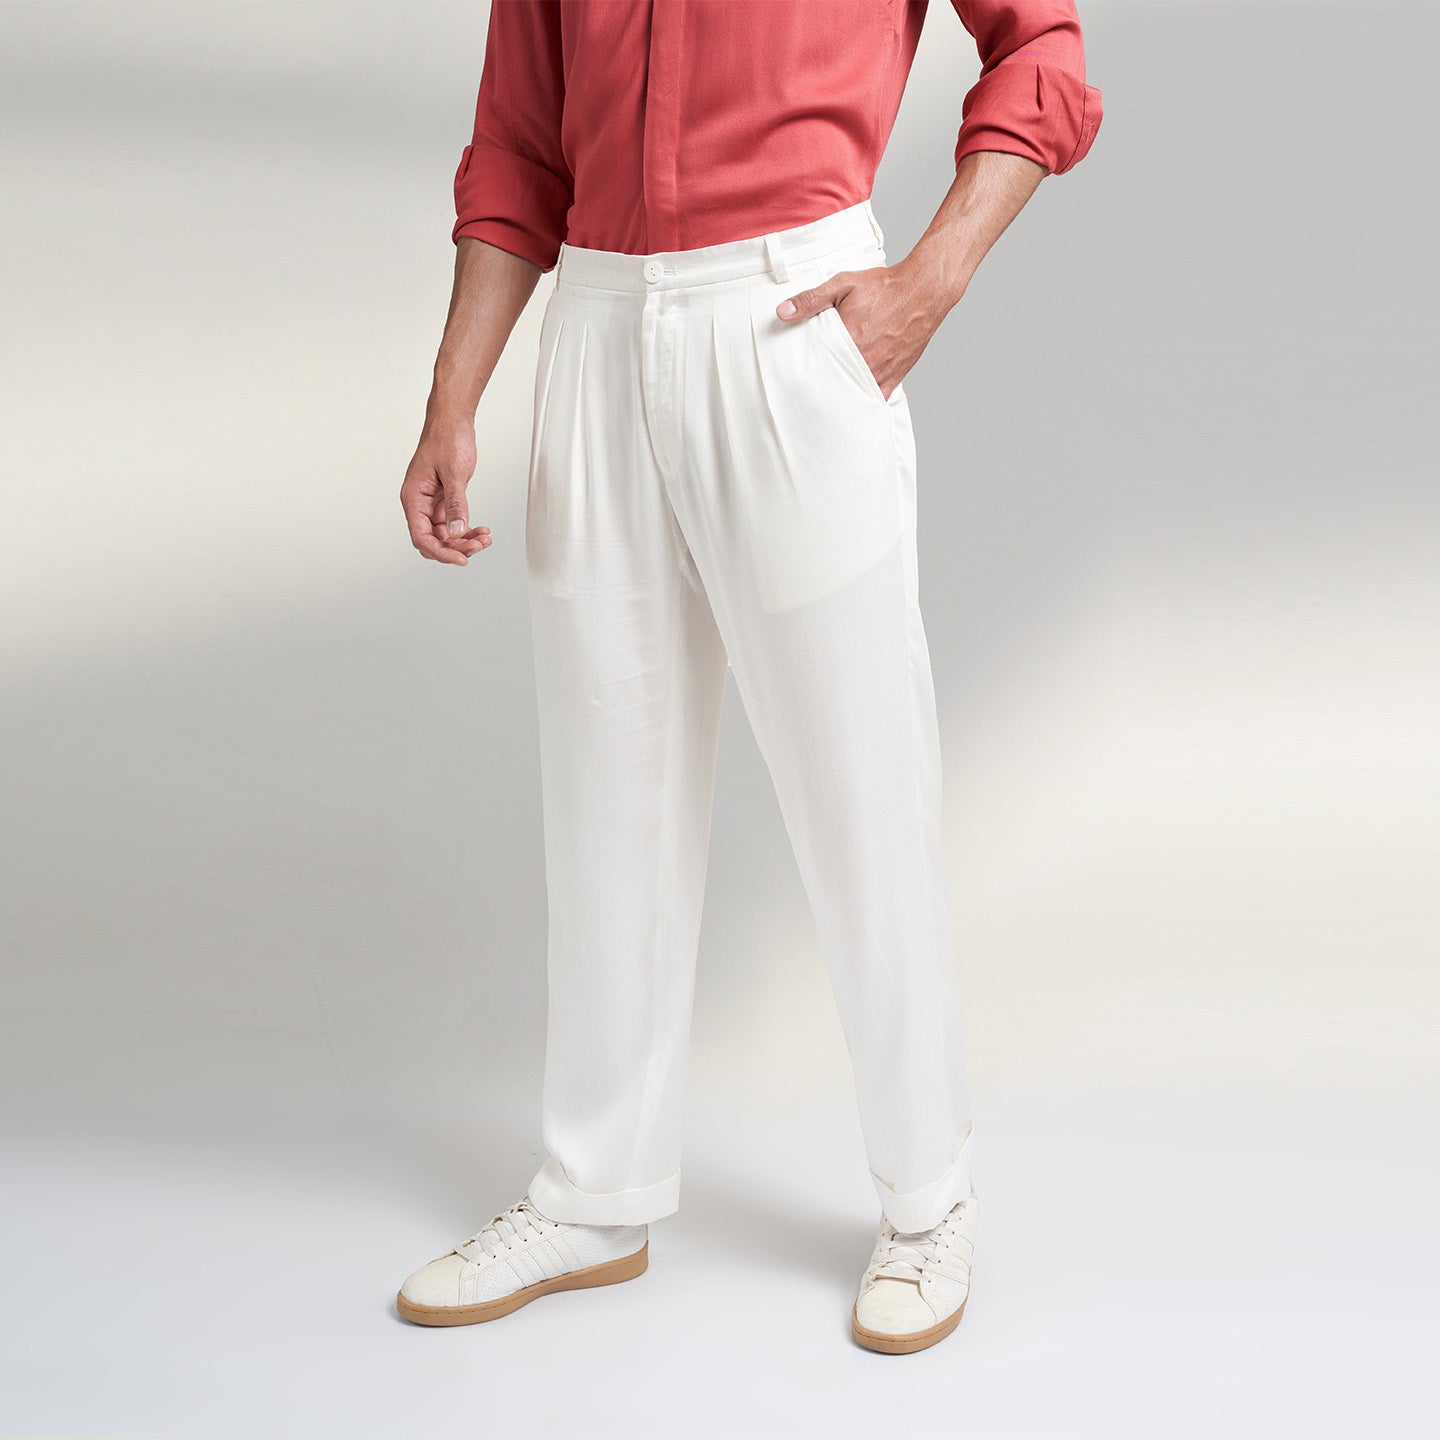 A COMFORT fit trousers in organic lotus stem fabric with 2 front pleats and turn up bottom and one back pocket details. the Trouser is super soft and comfortable to wear.